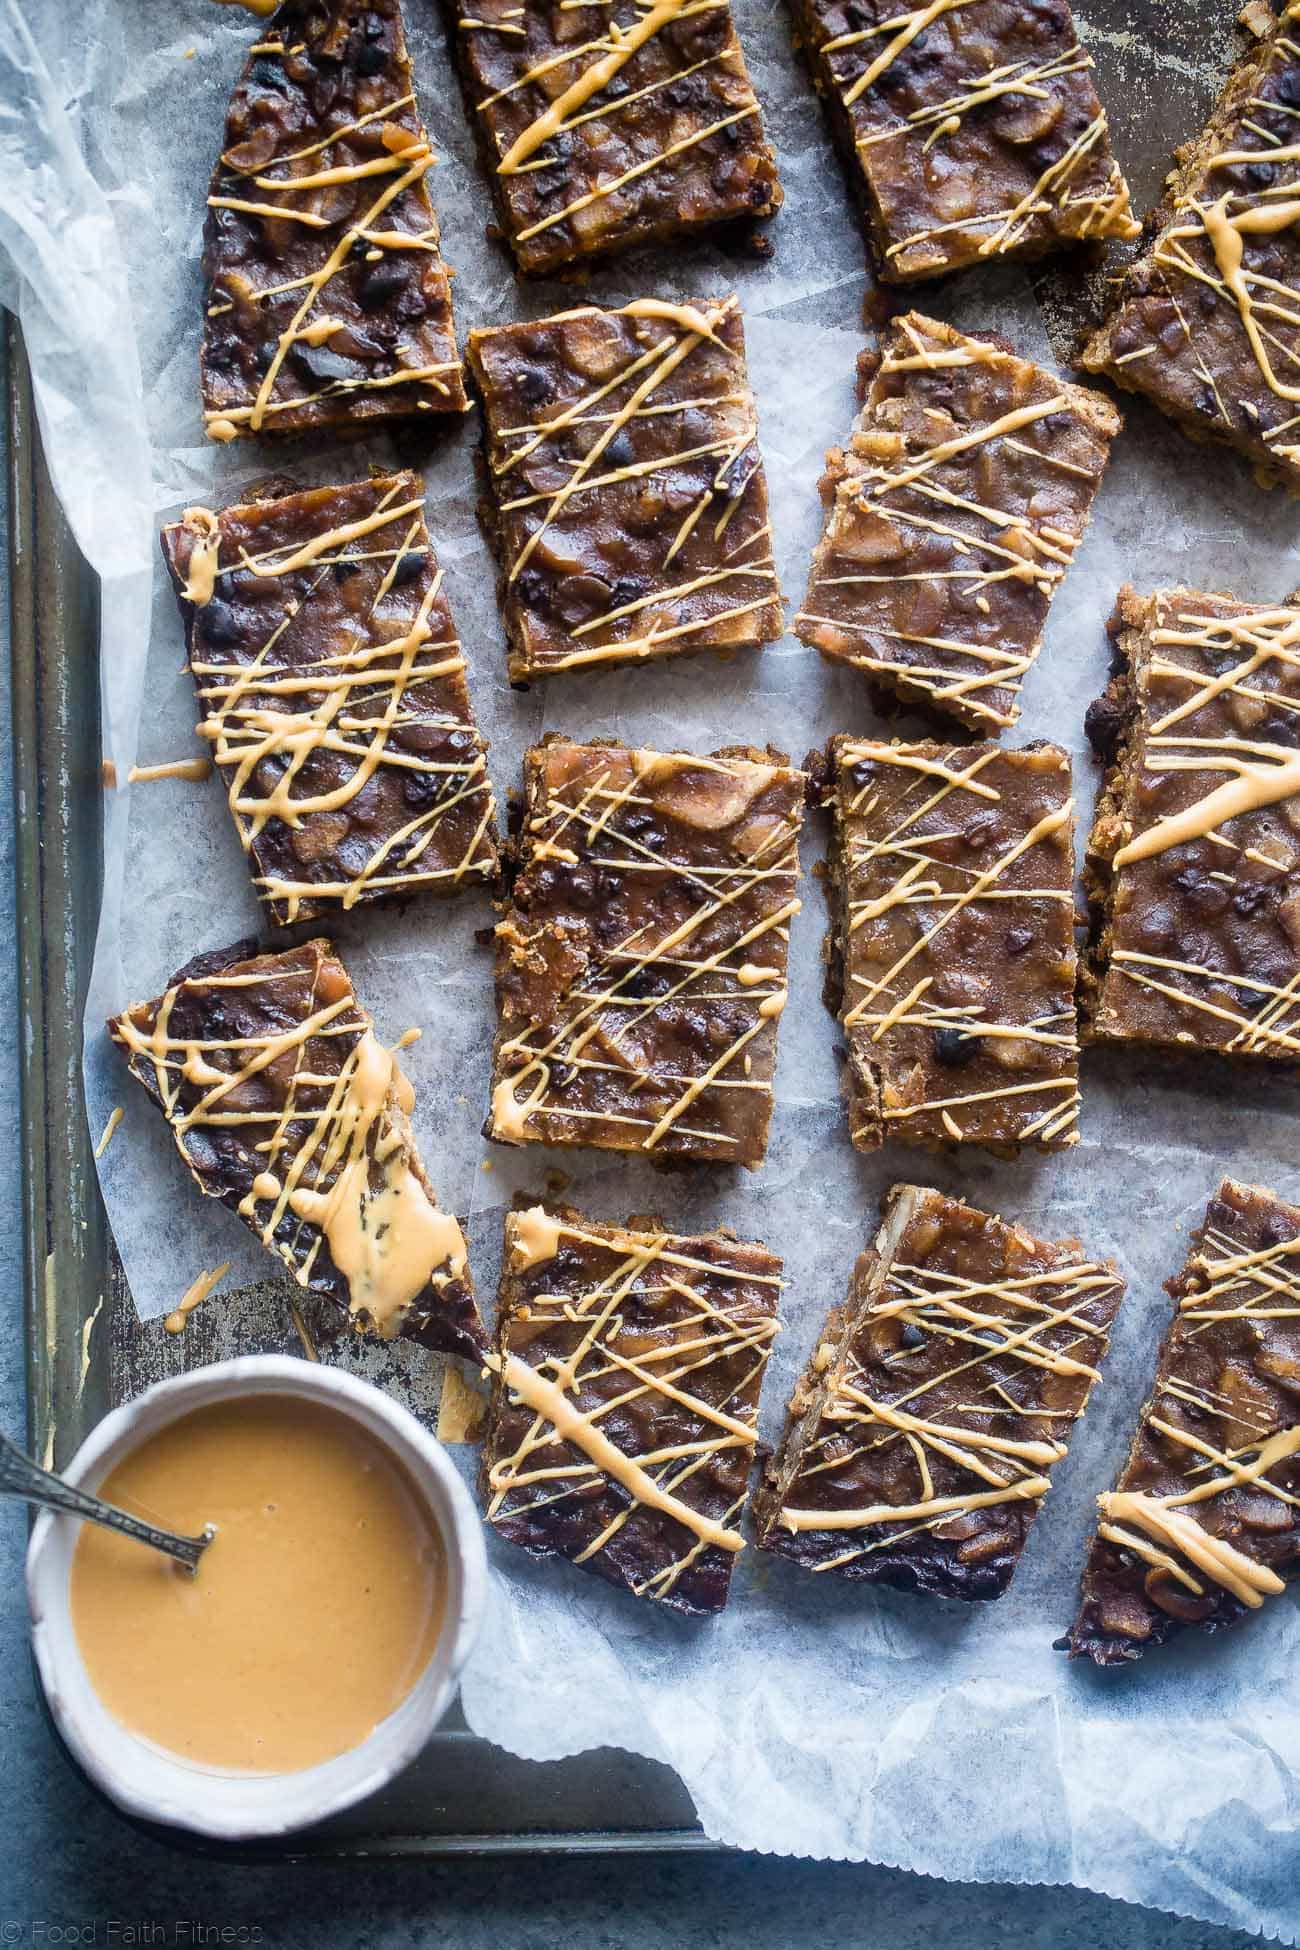 Slow Cooker Steel Cut Oats Energy Bars - These dairy free peanut butter banana energy bars are made in the slow cooker! They're an easy, healthy portable breakfast or snack! Kid friendly too! | Foodfaithfitness.com | @FoodFaithFit